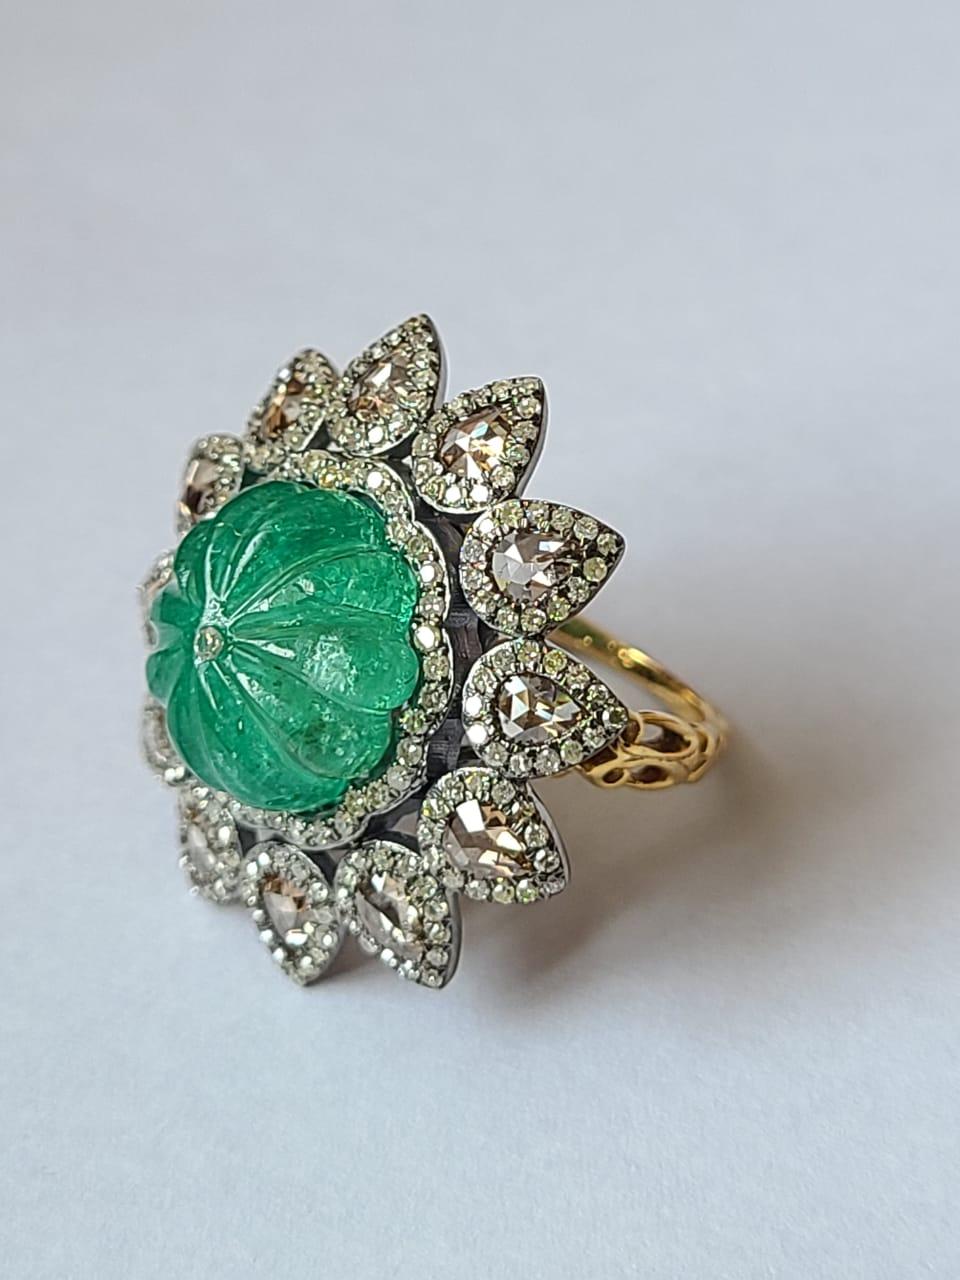 Natural, Carved Emerald & Rose Cut Diamonds Victorian / Art Deco Cocktail Ring 1